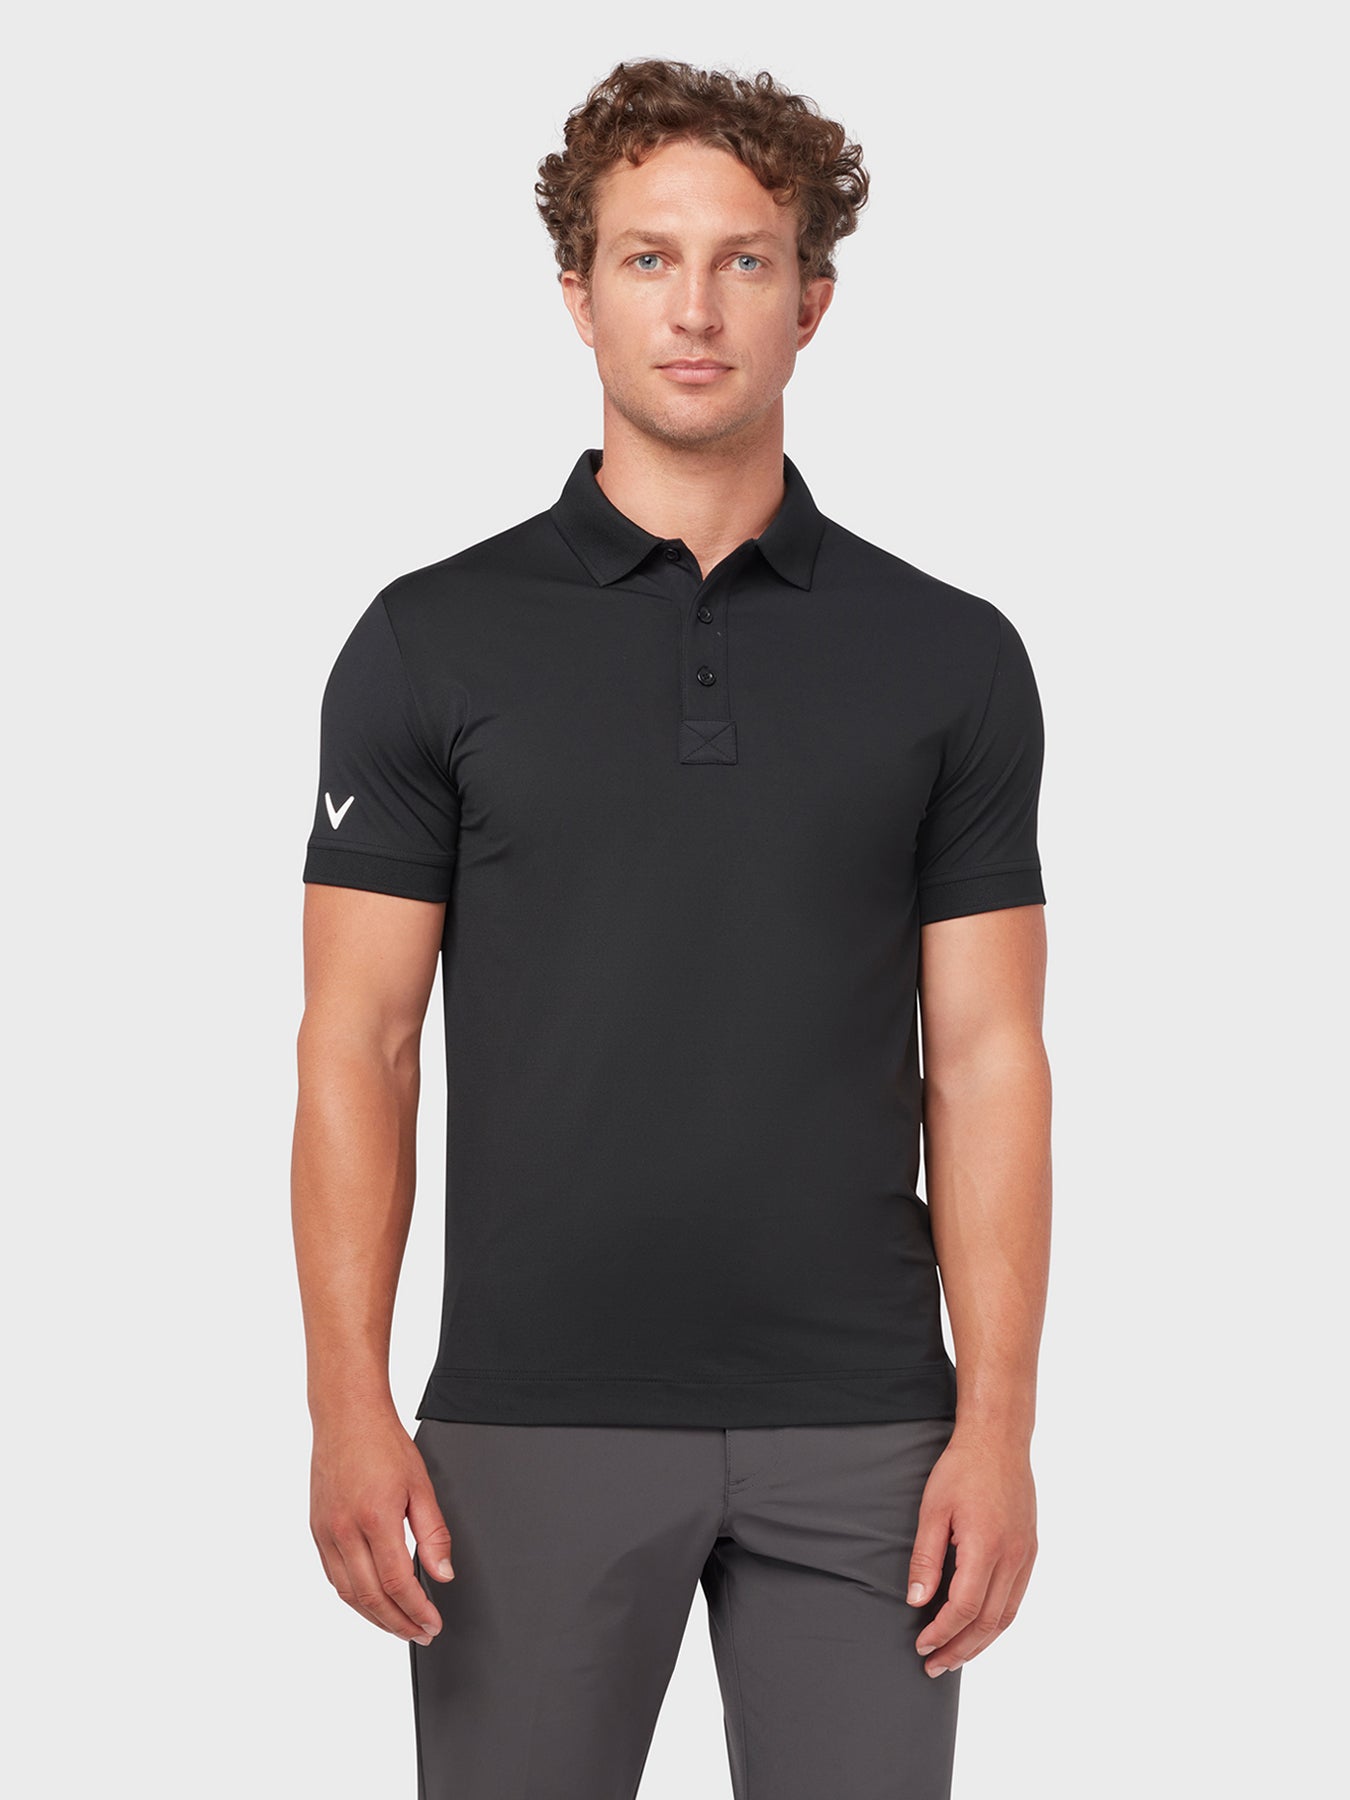 View X Series Solid Ribbed Polo In Caviar Caviar S information